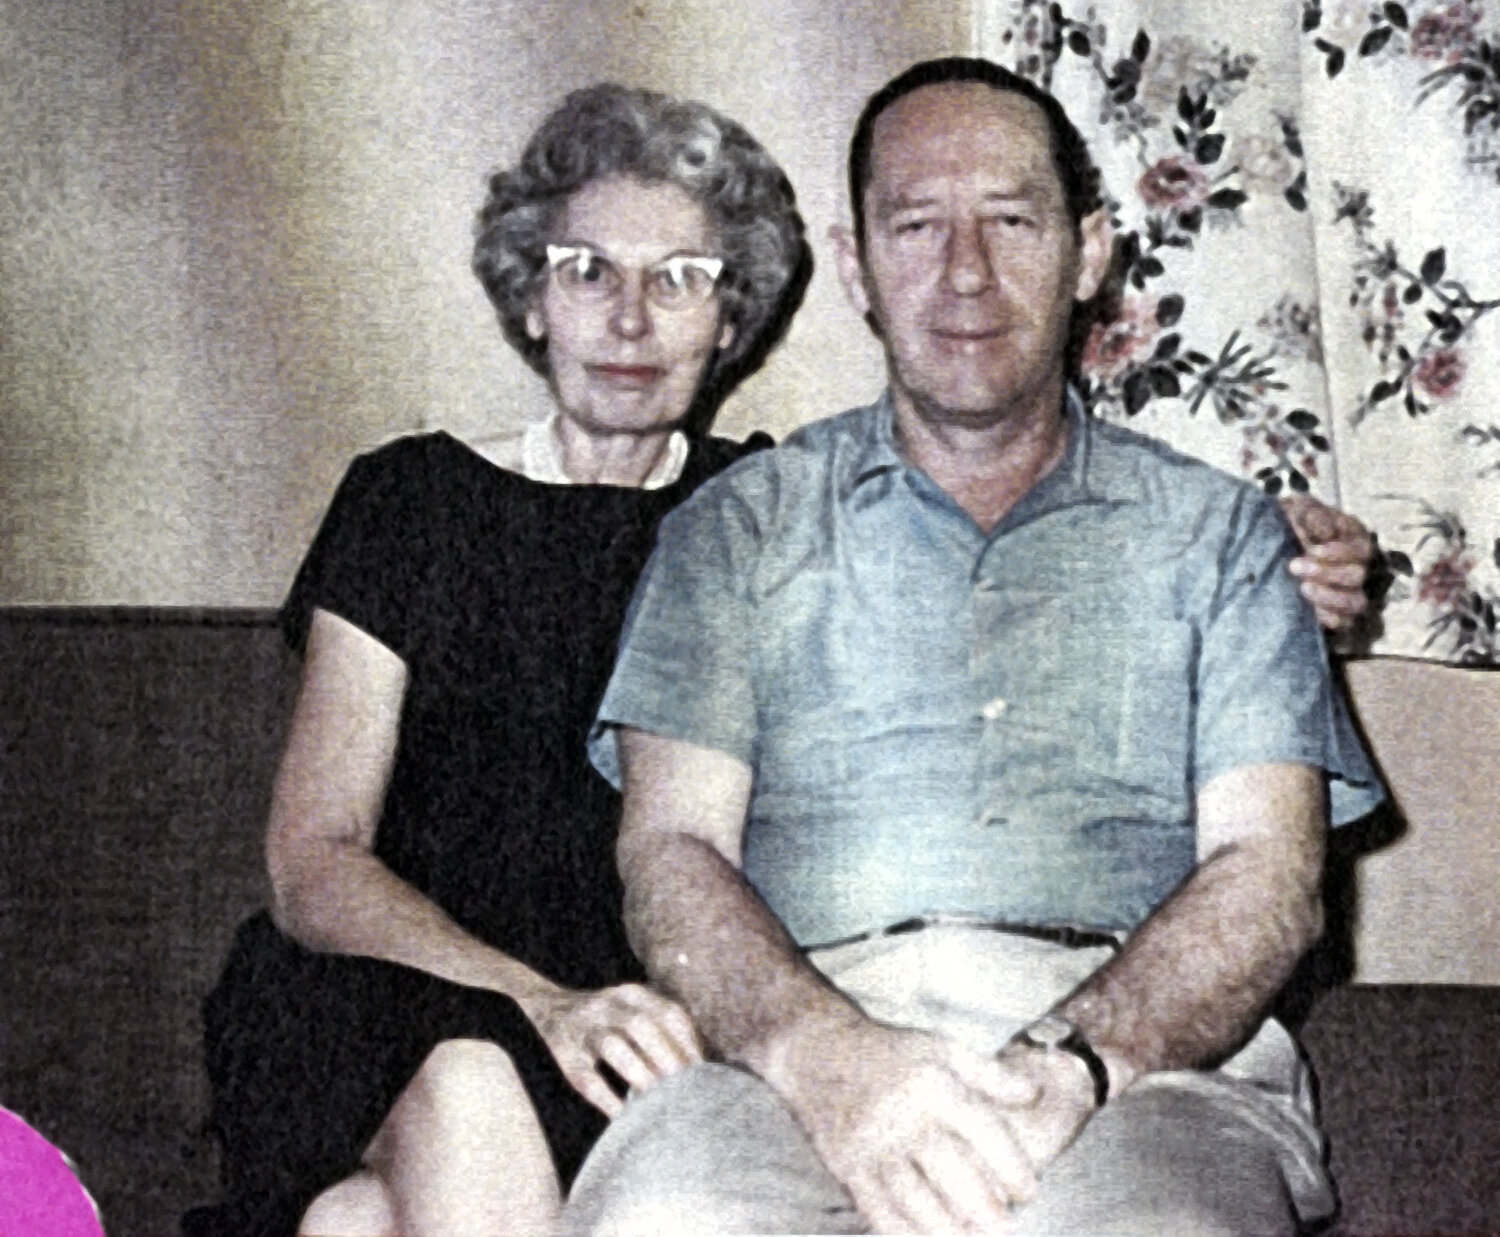 Viola “Vi” and Ted McGill are pictured at home in this photo provided by O Bee Credit Union.